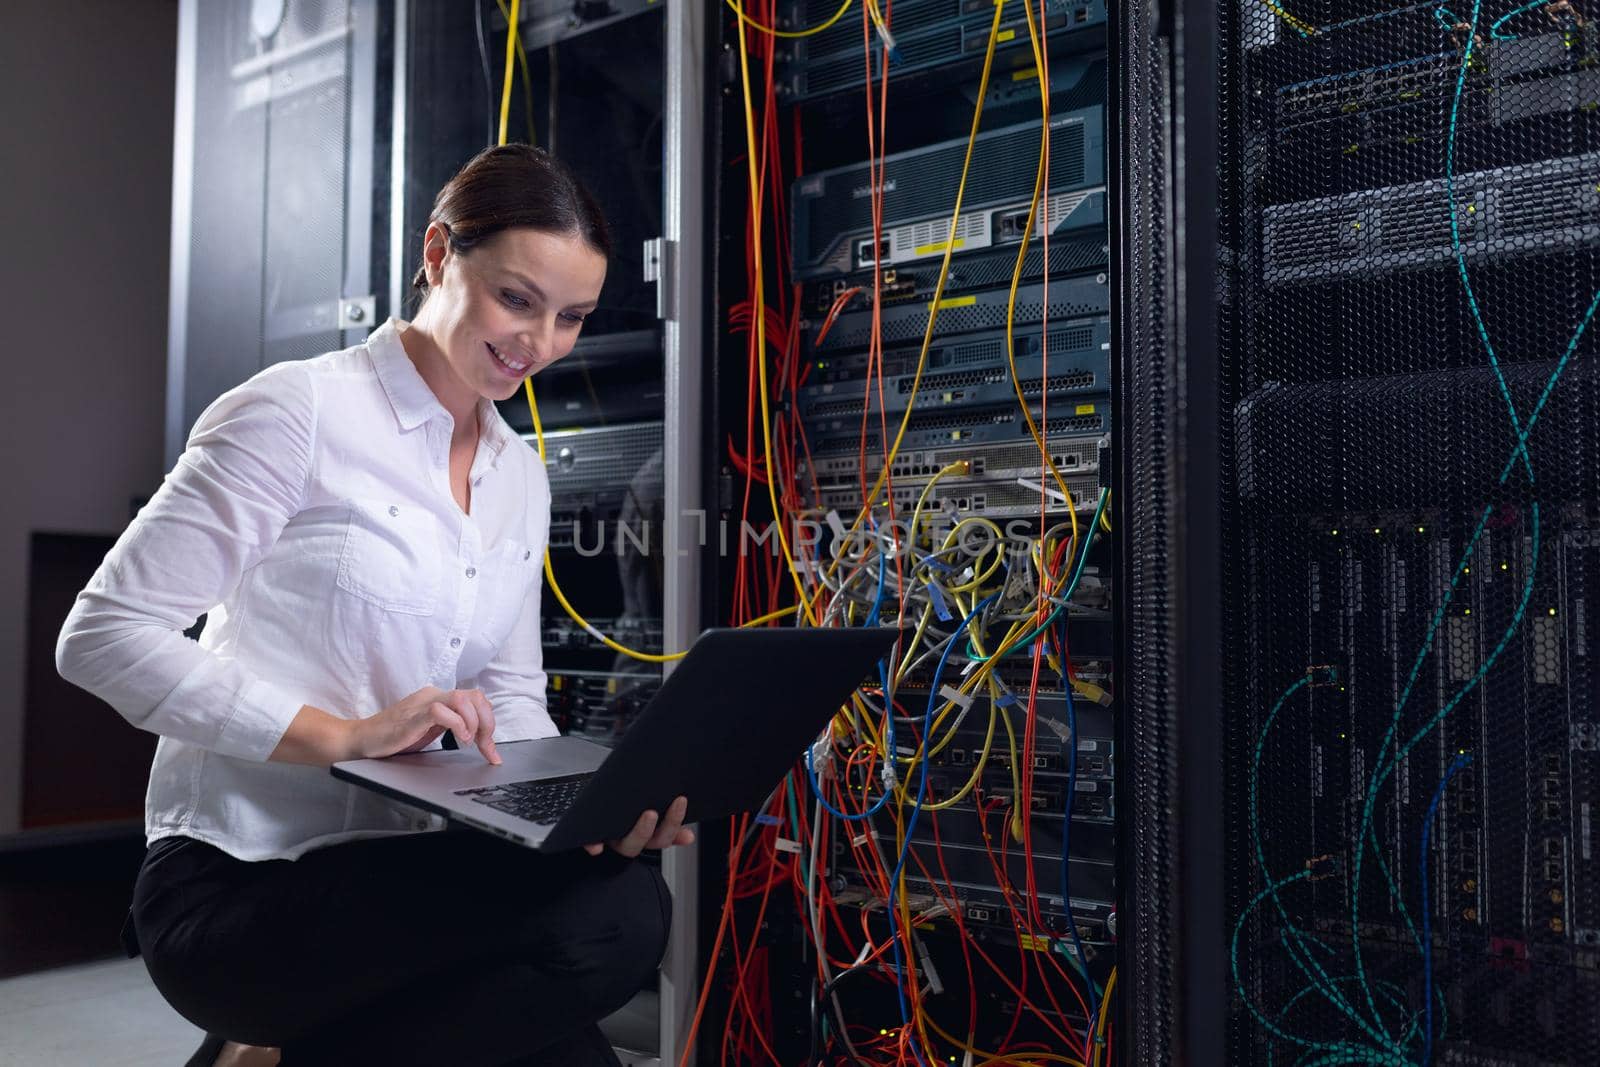 Caucasian female engineer using laptop and inspecting computer server in computer server room by Wavebreakmedia